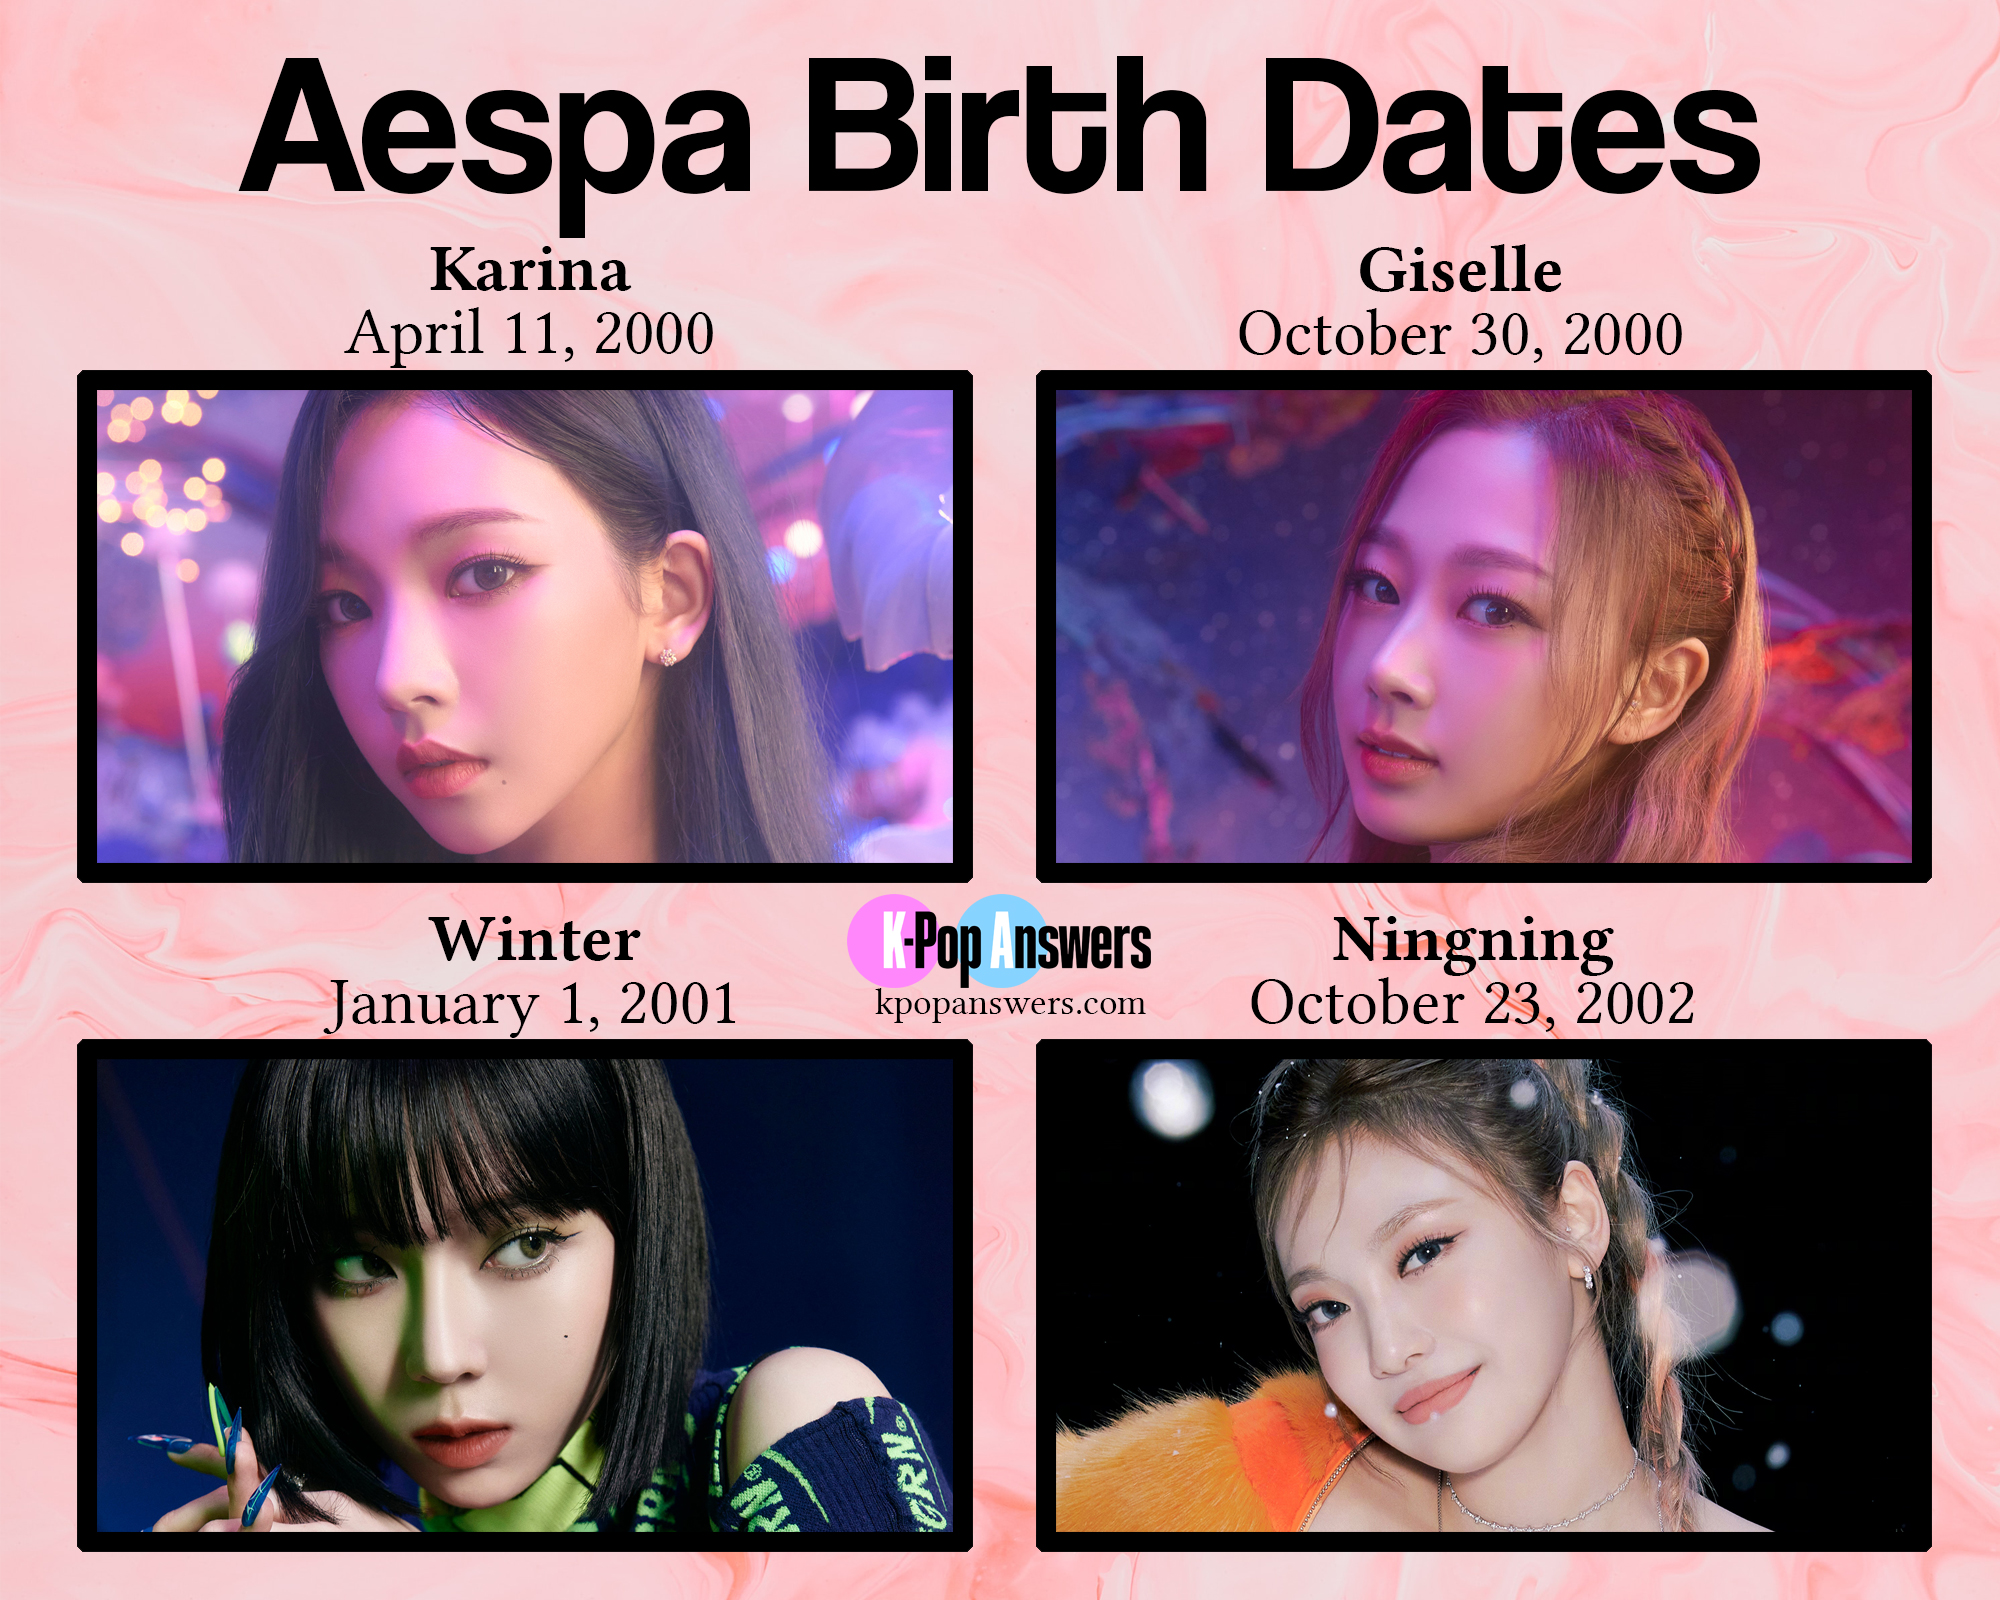 How Old Are the Aespa Members?